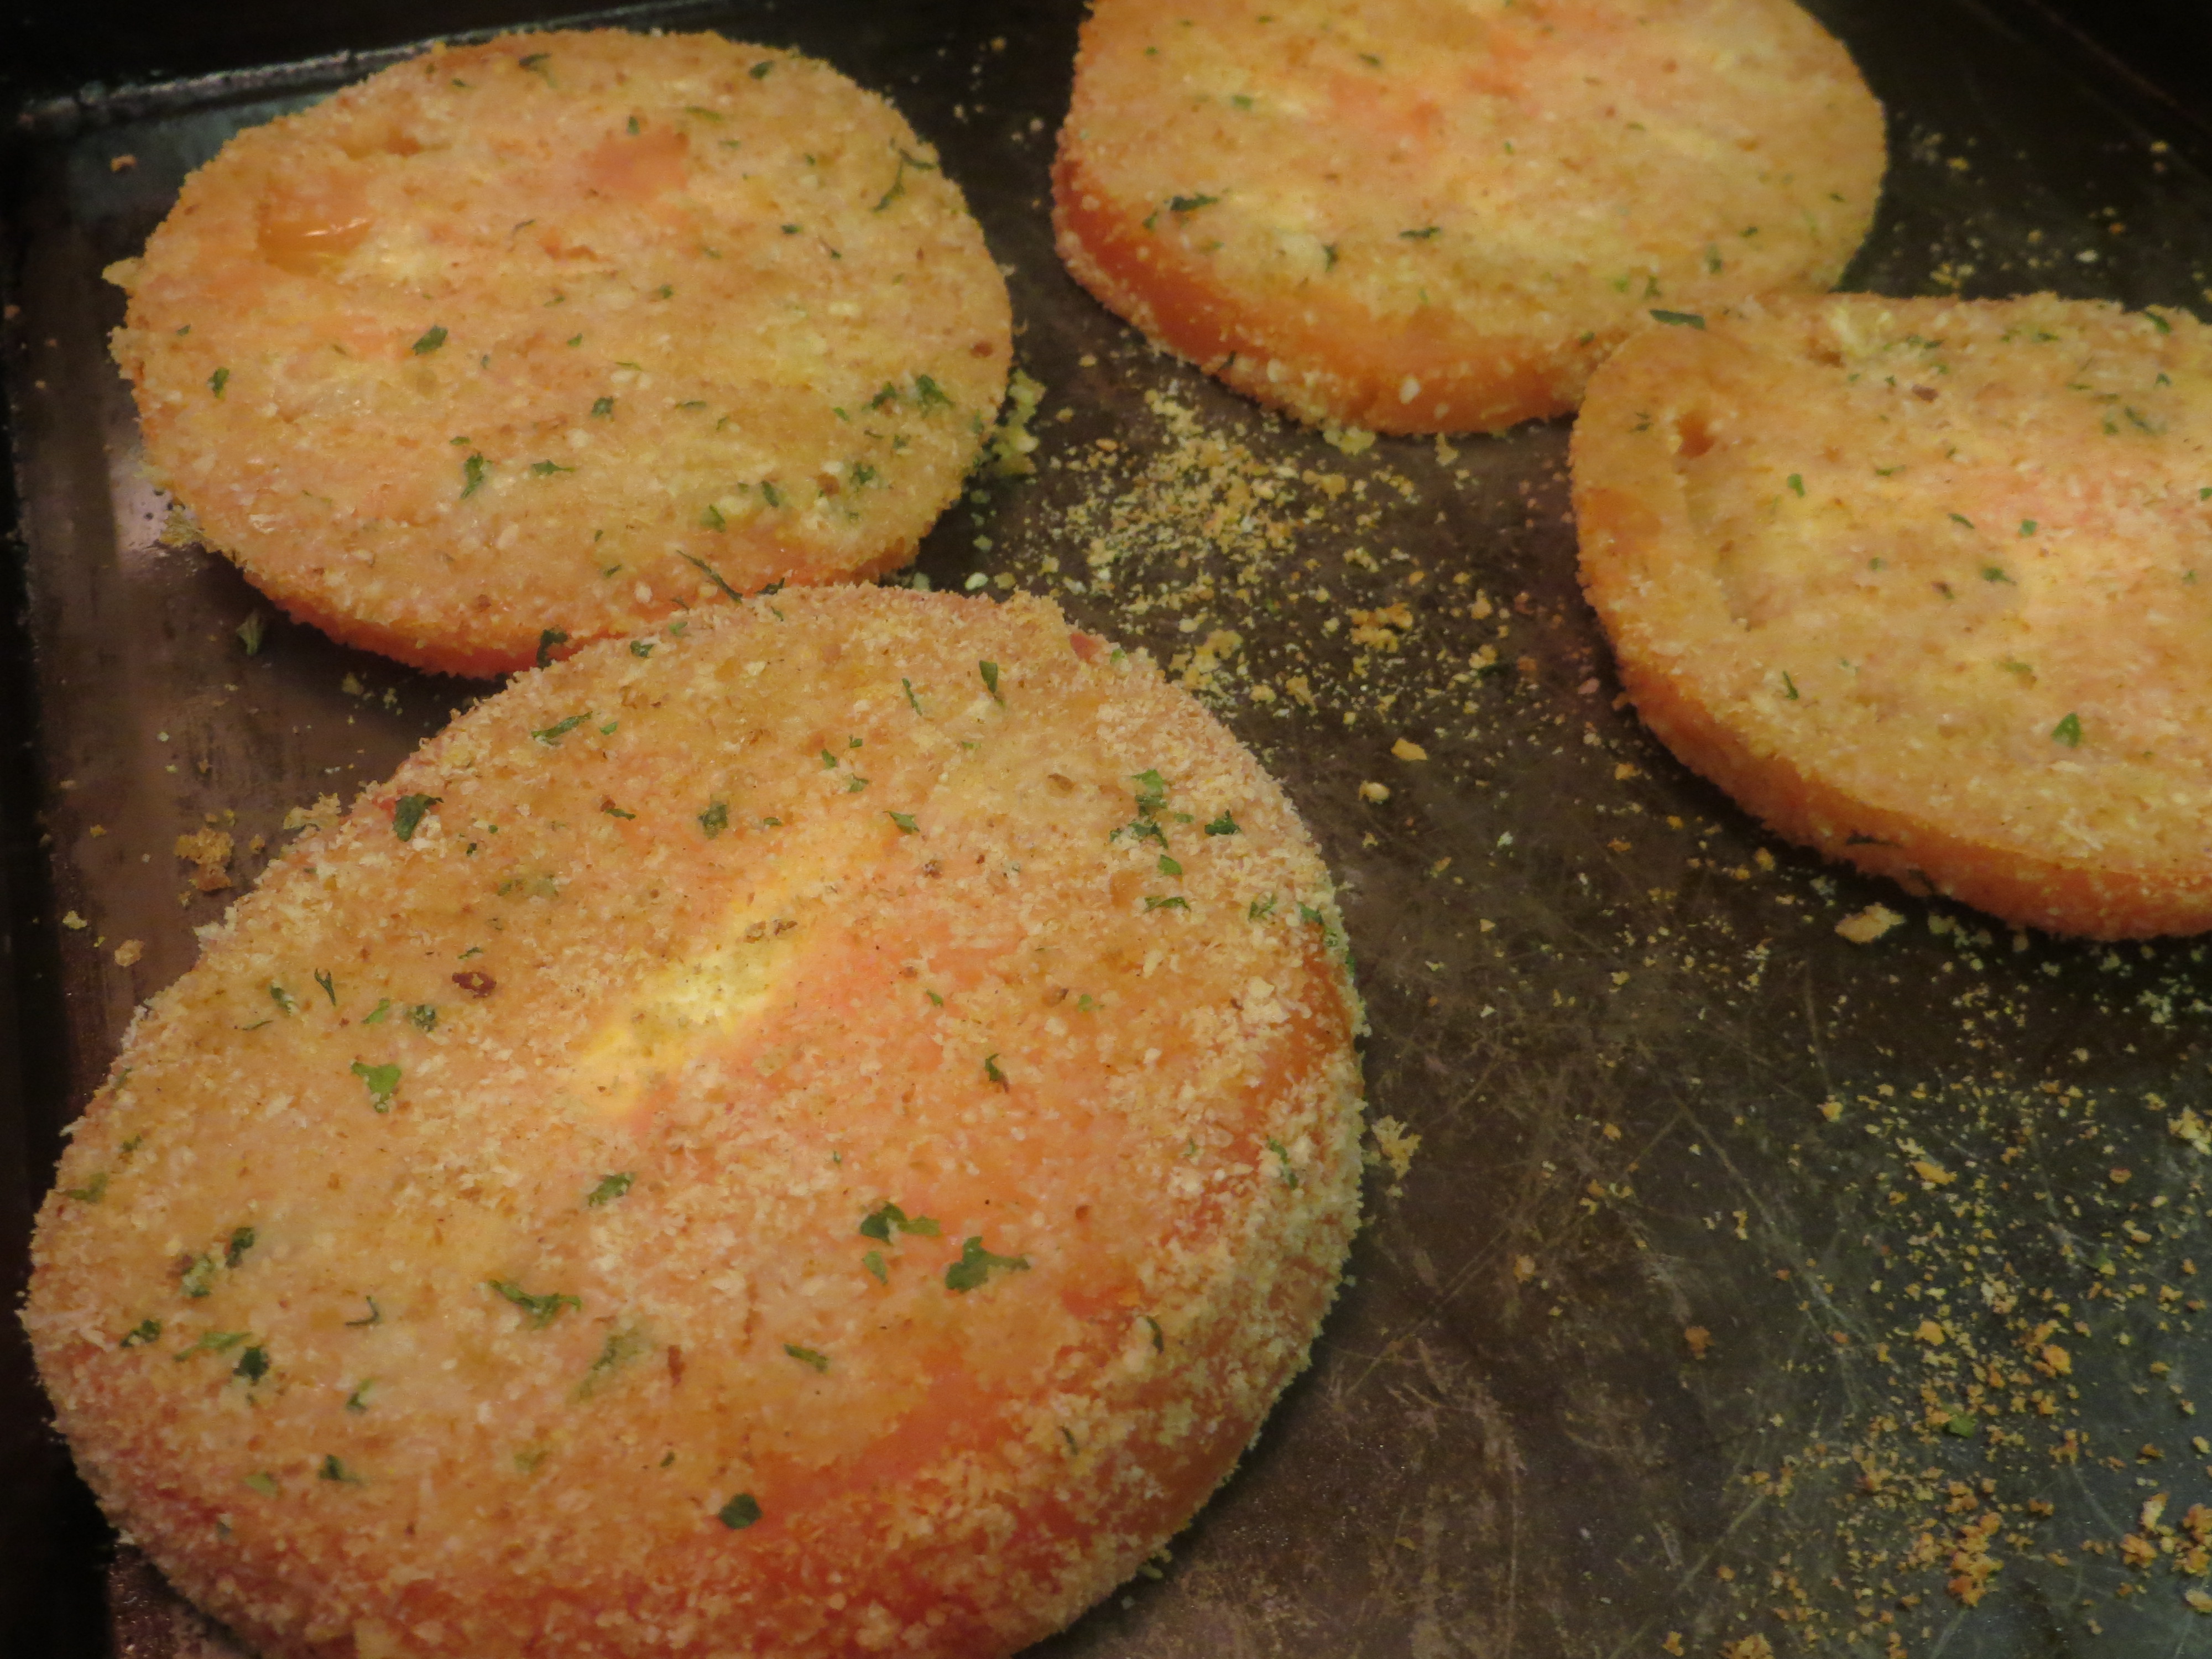 Sliced tomatoes coated with bread crumbs, parmesan cheese, salt and pepper.